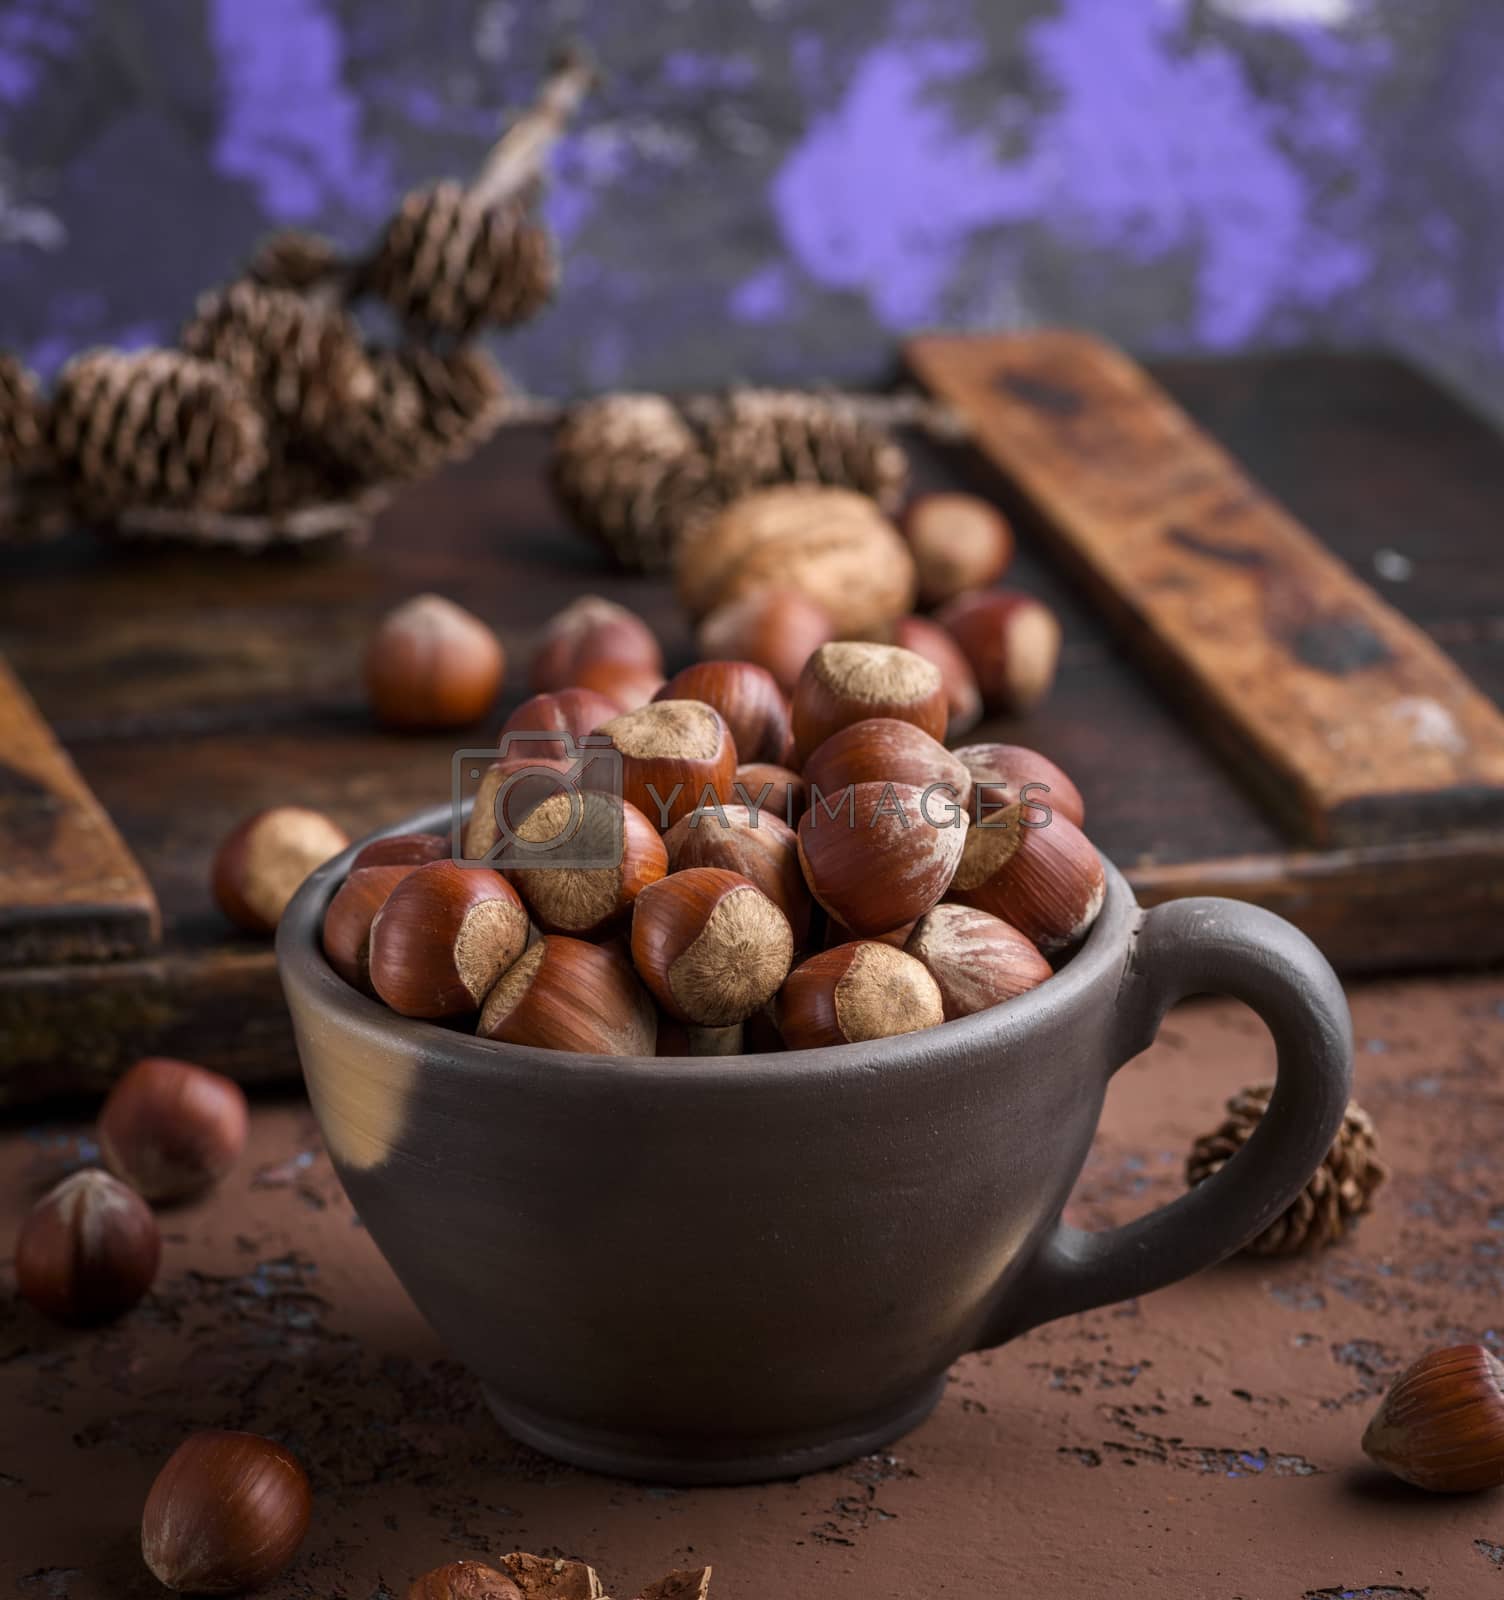 Royalty free image of whole hazelnut nutshell in a brown clay cup by ndanko